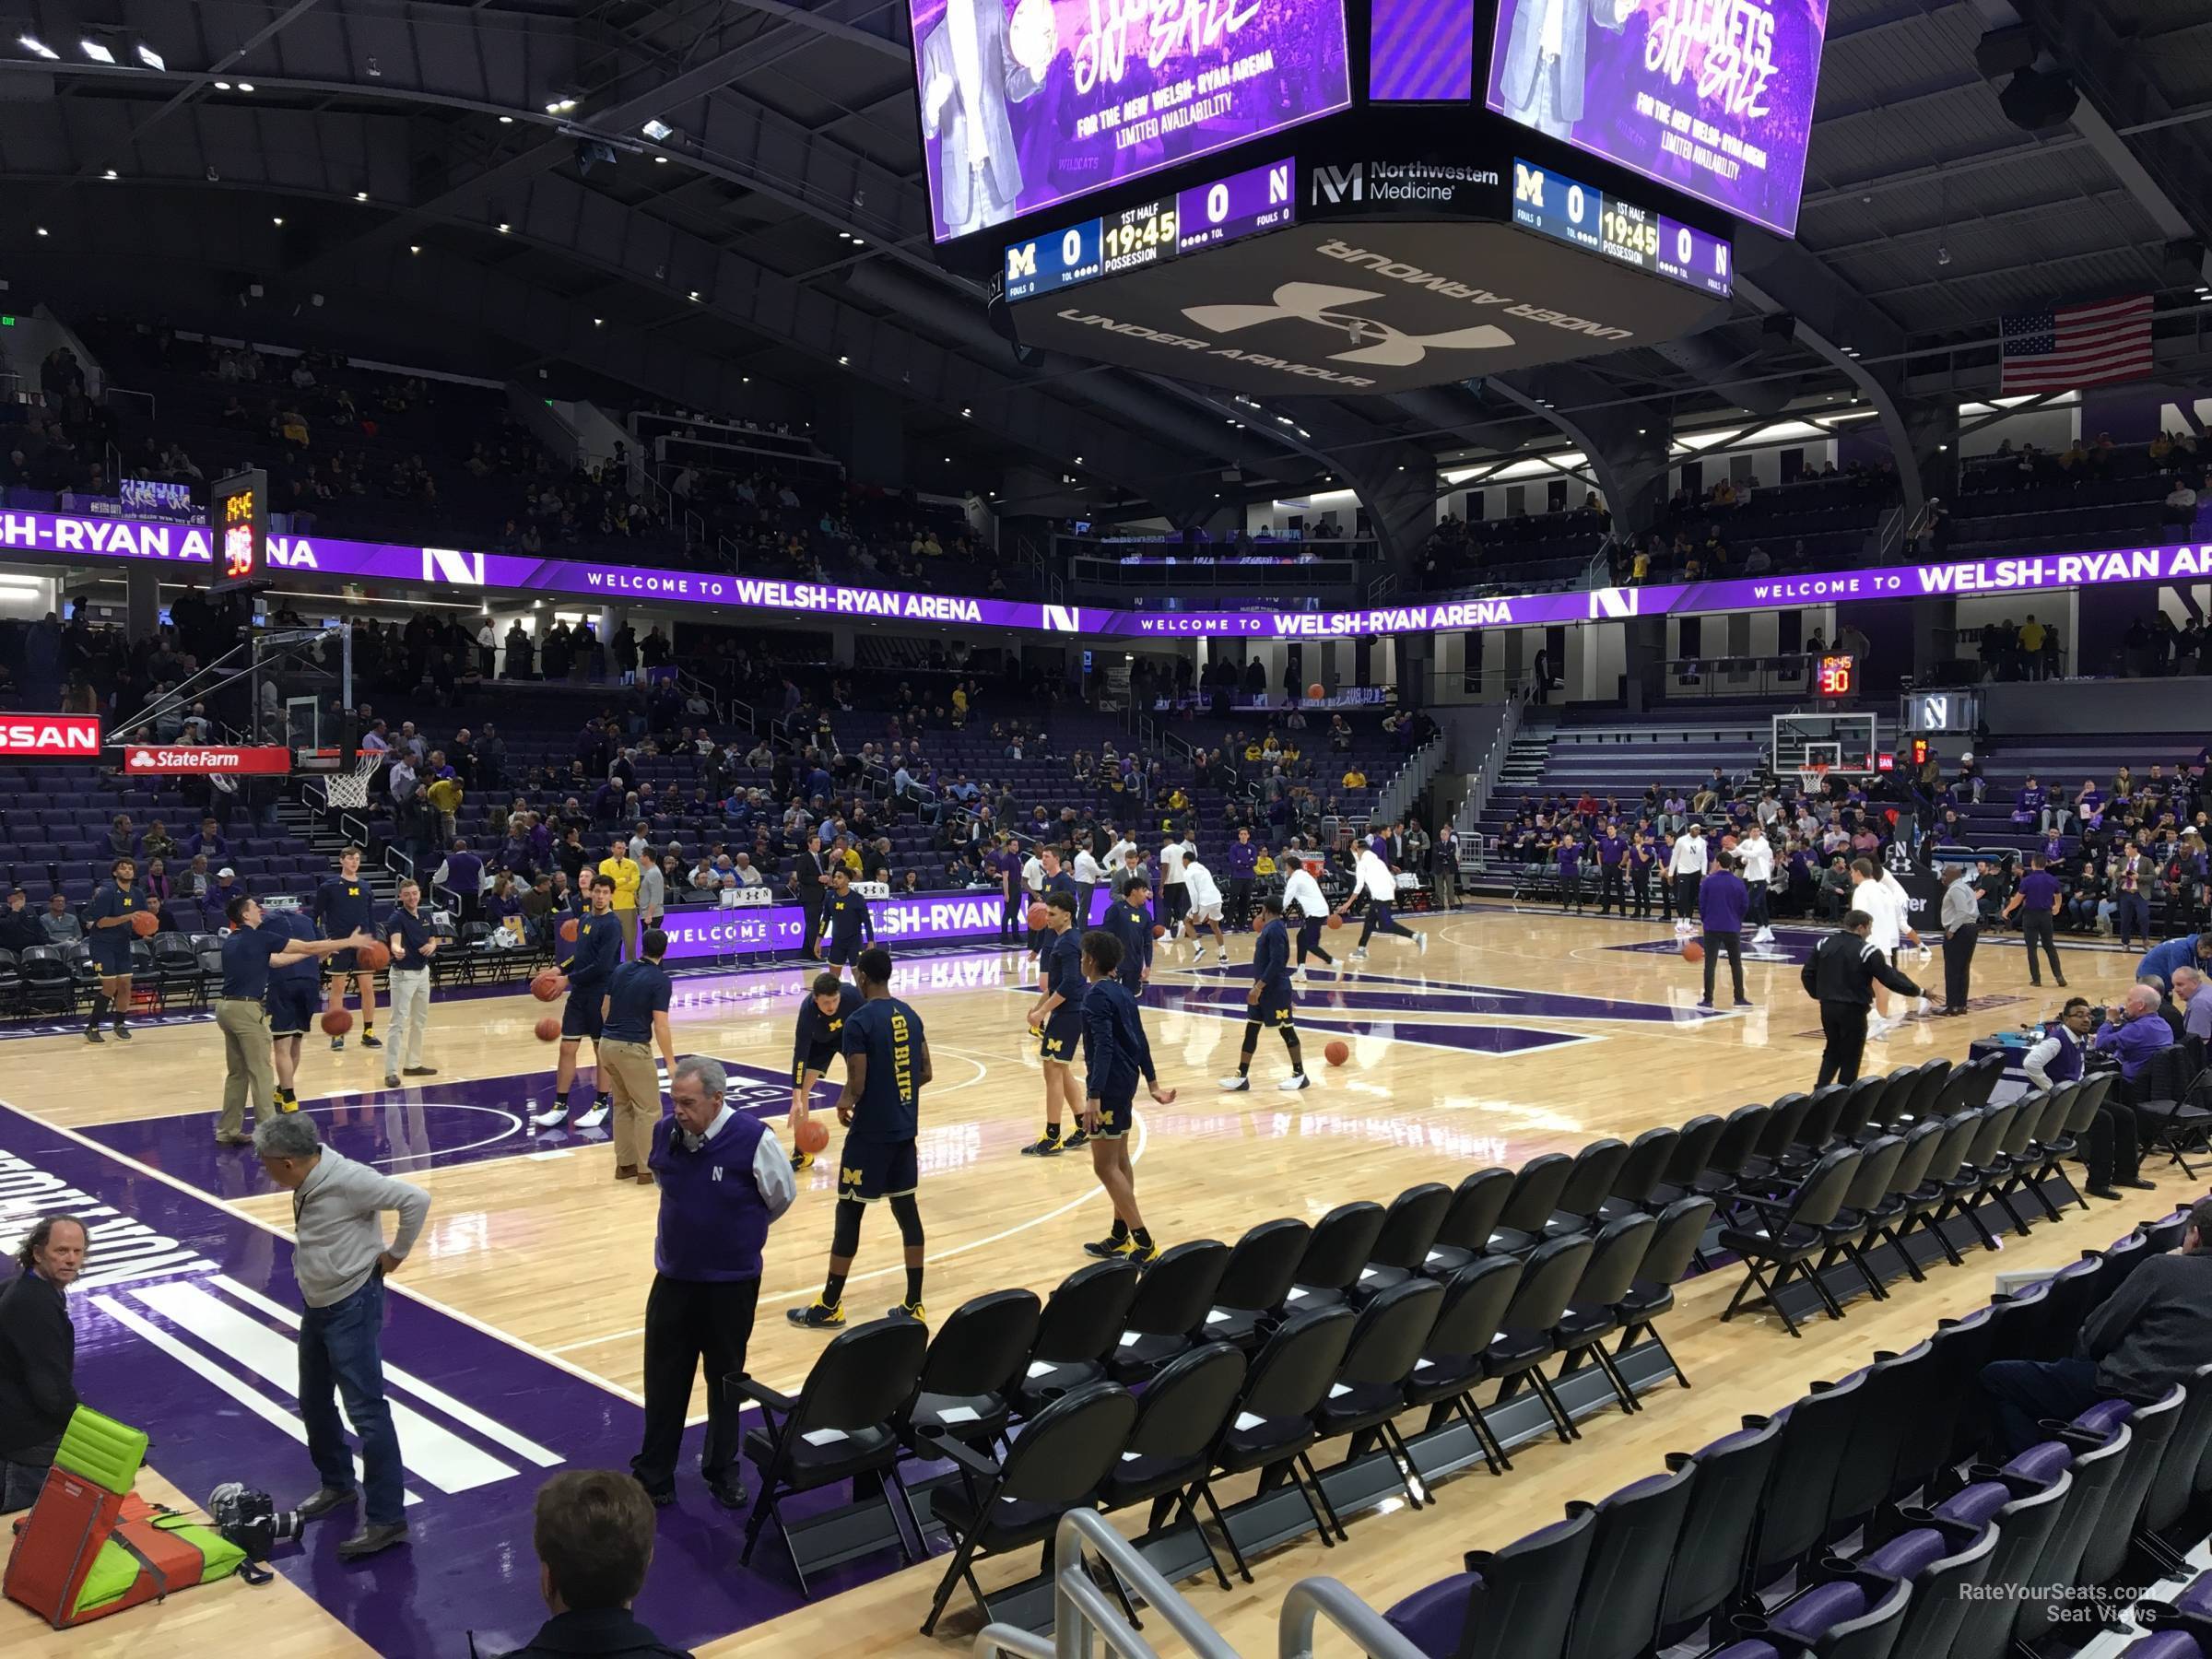 section 102, row 5 seat view  - welsh-ryan arena